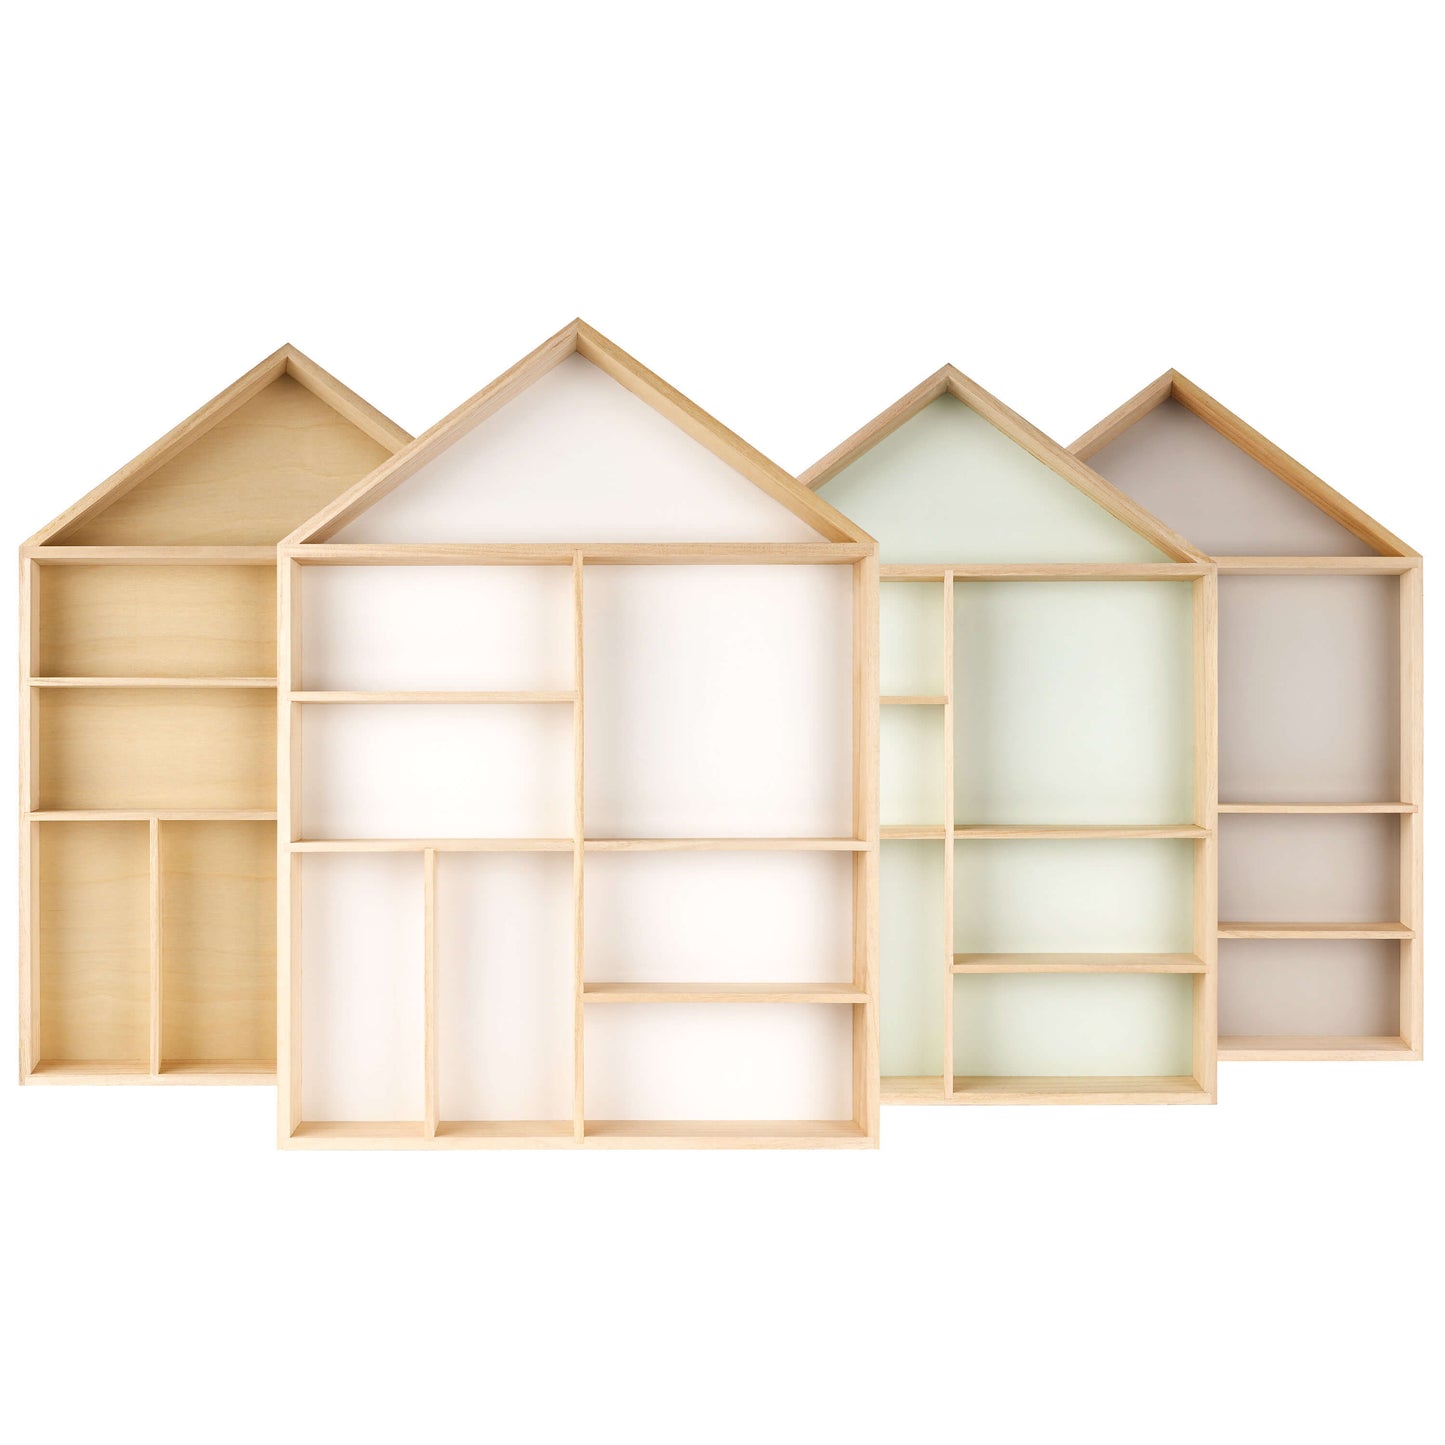 House shaped wooden toy display shelf - all color variations displayed side by side (front view)